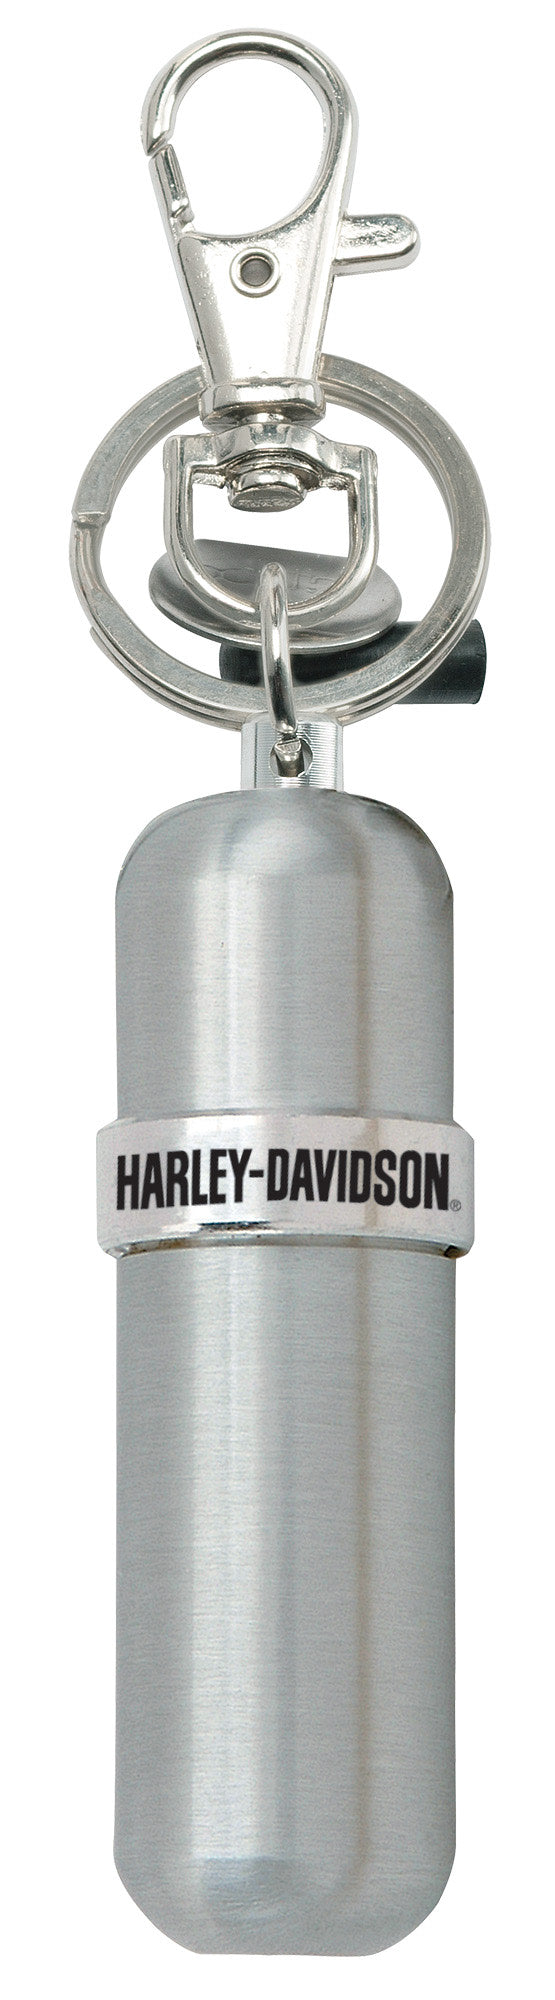 Zippo Harley Davidson Fuel Canister Gift Set fuel canister.